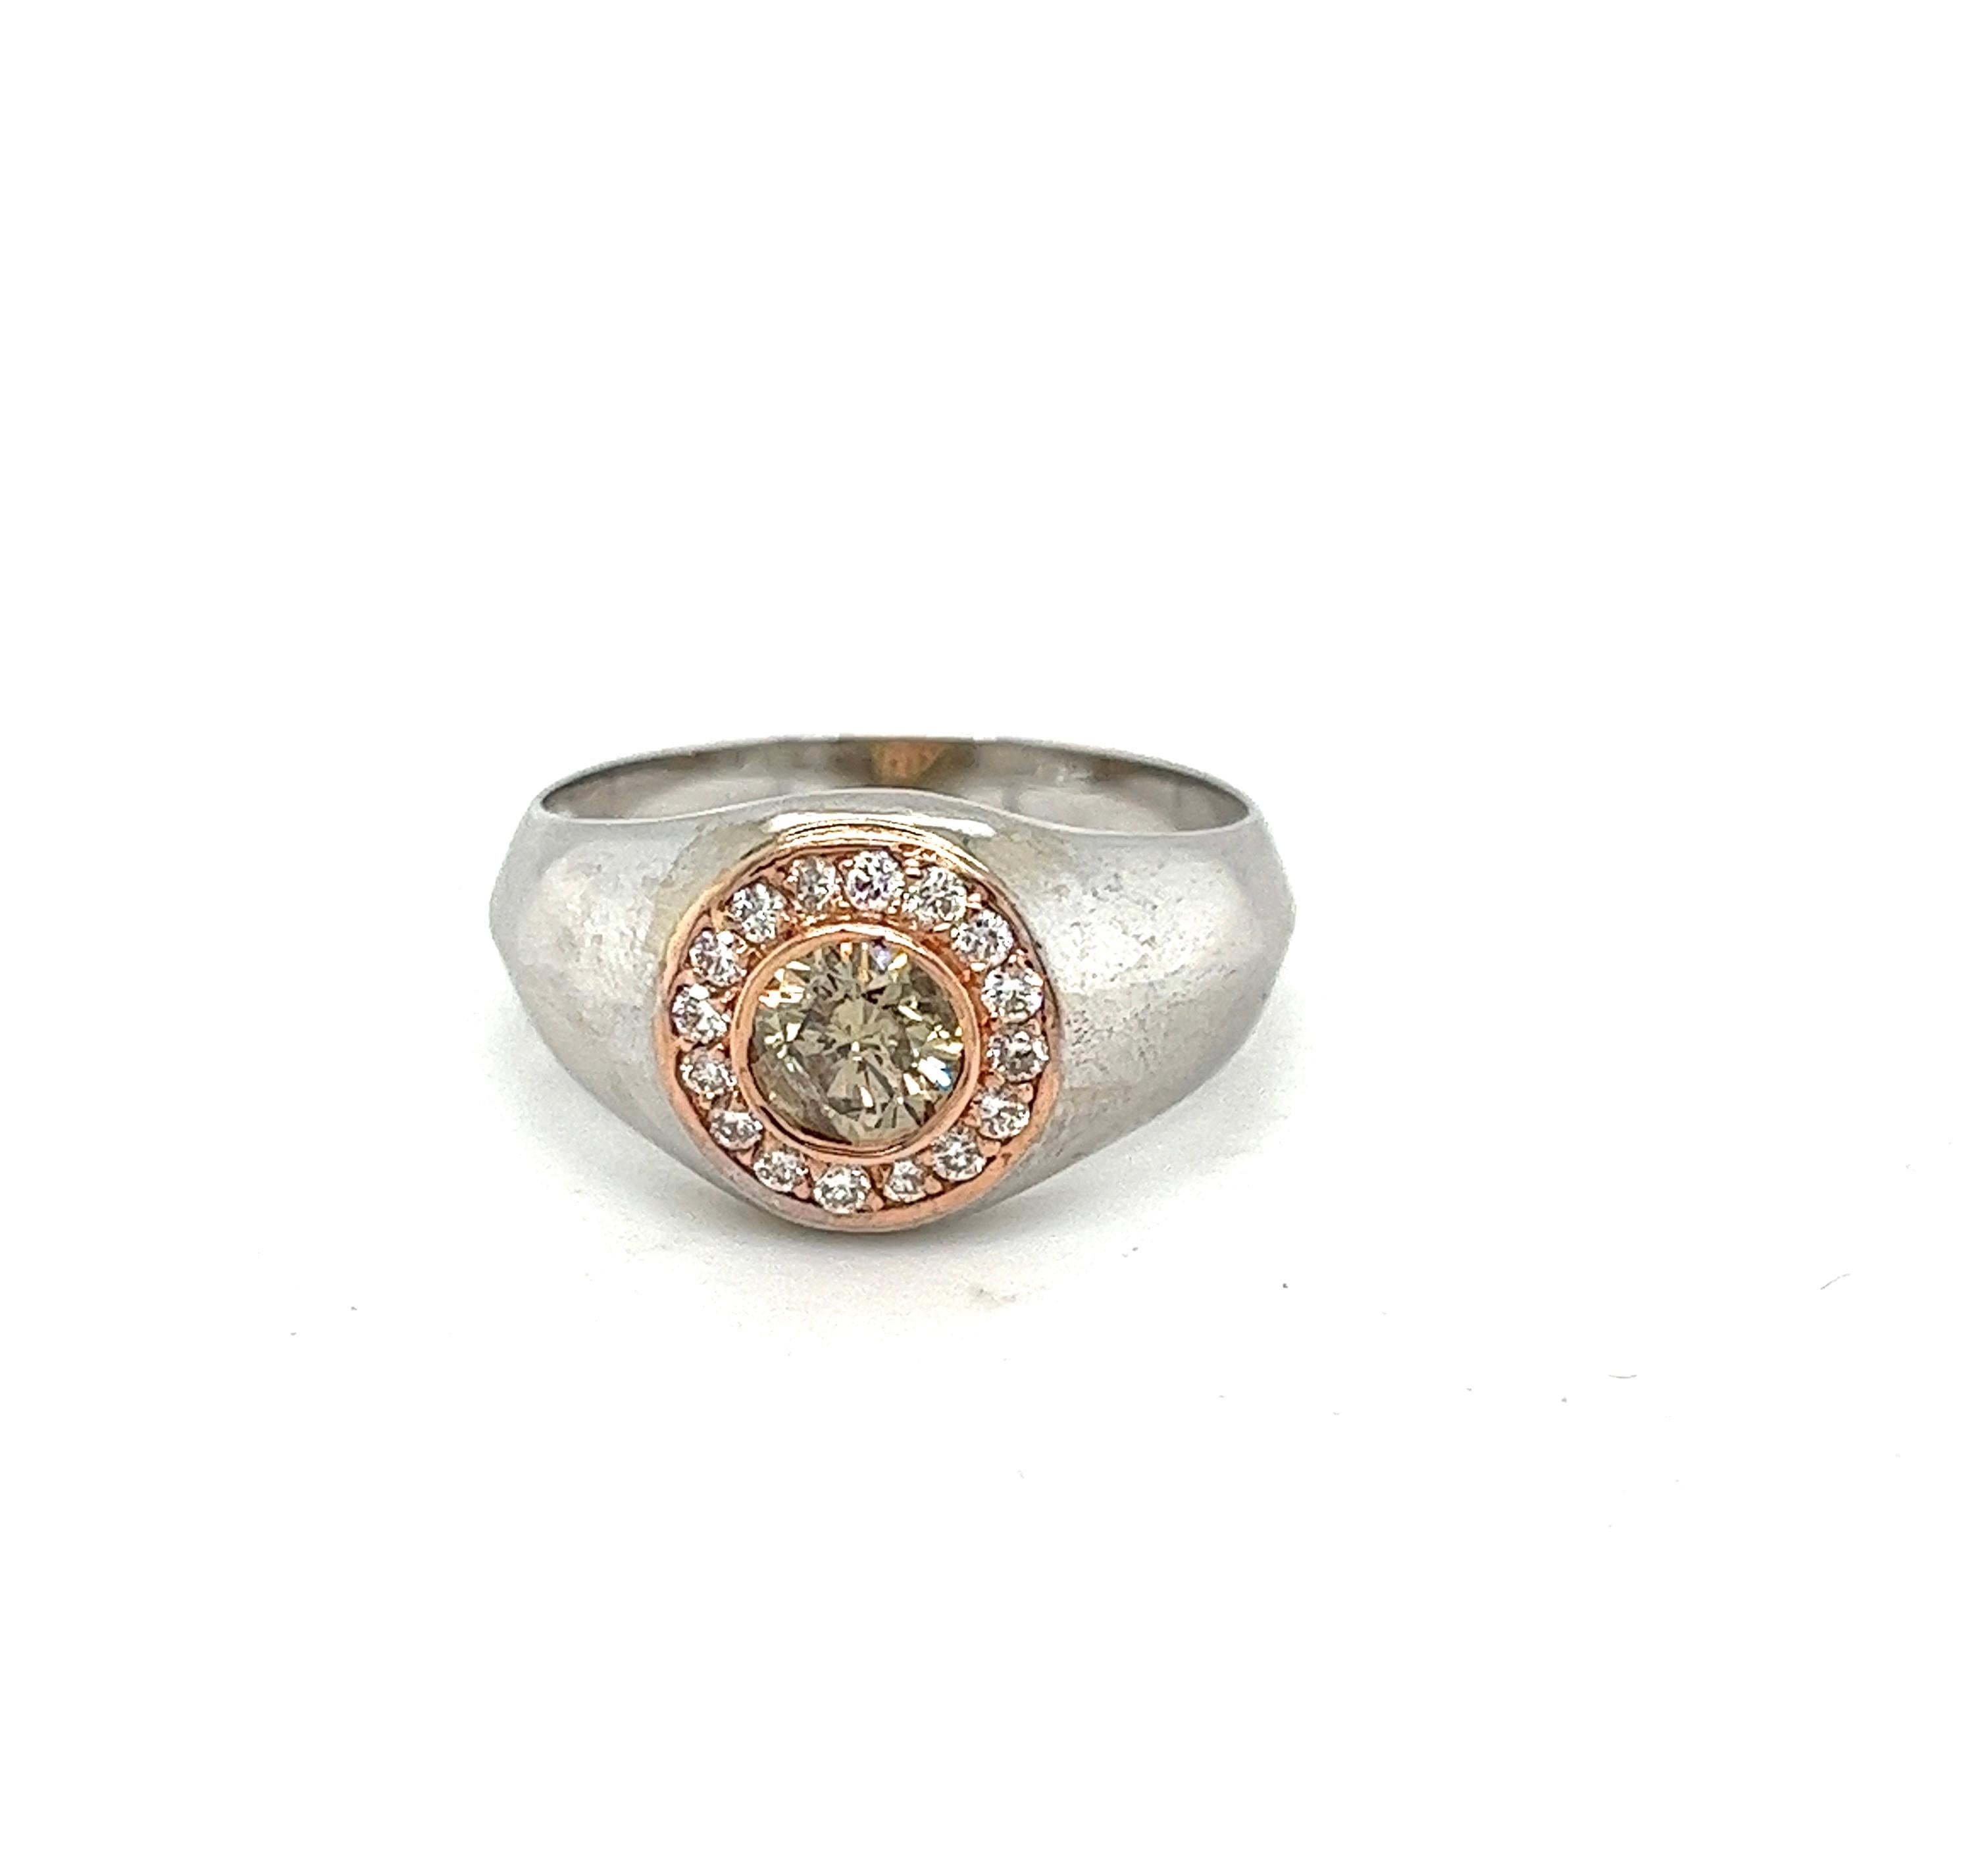 Offered here is a bold Ring made in solid 14 karat white gold with a rose gold top, centered with one natural earth mined round diamond cognac color with some natural inclusions, framed with smaller natural earth mined white diamonds, sparkly bright